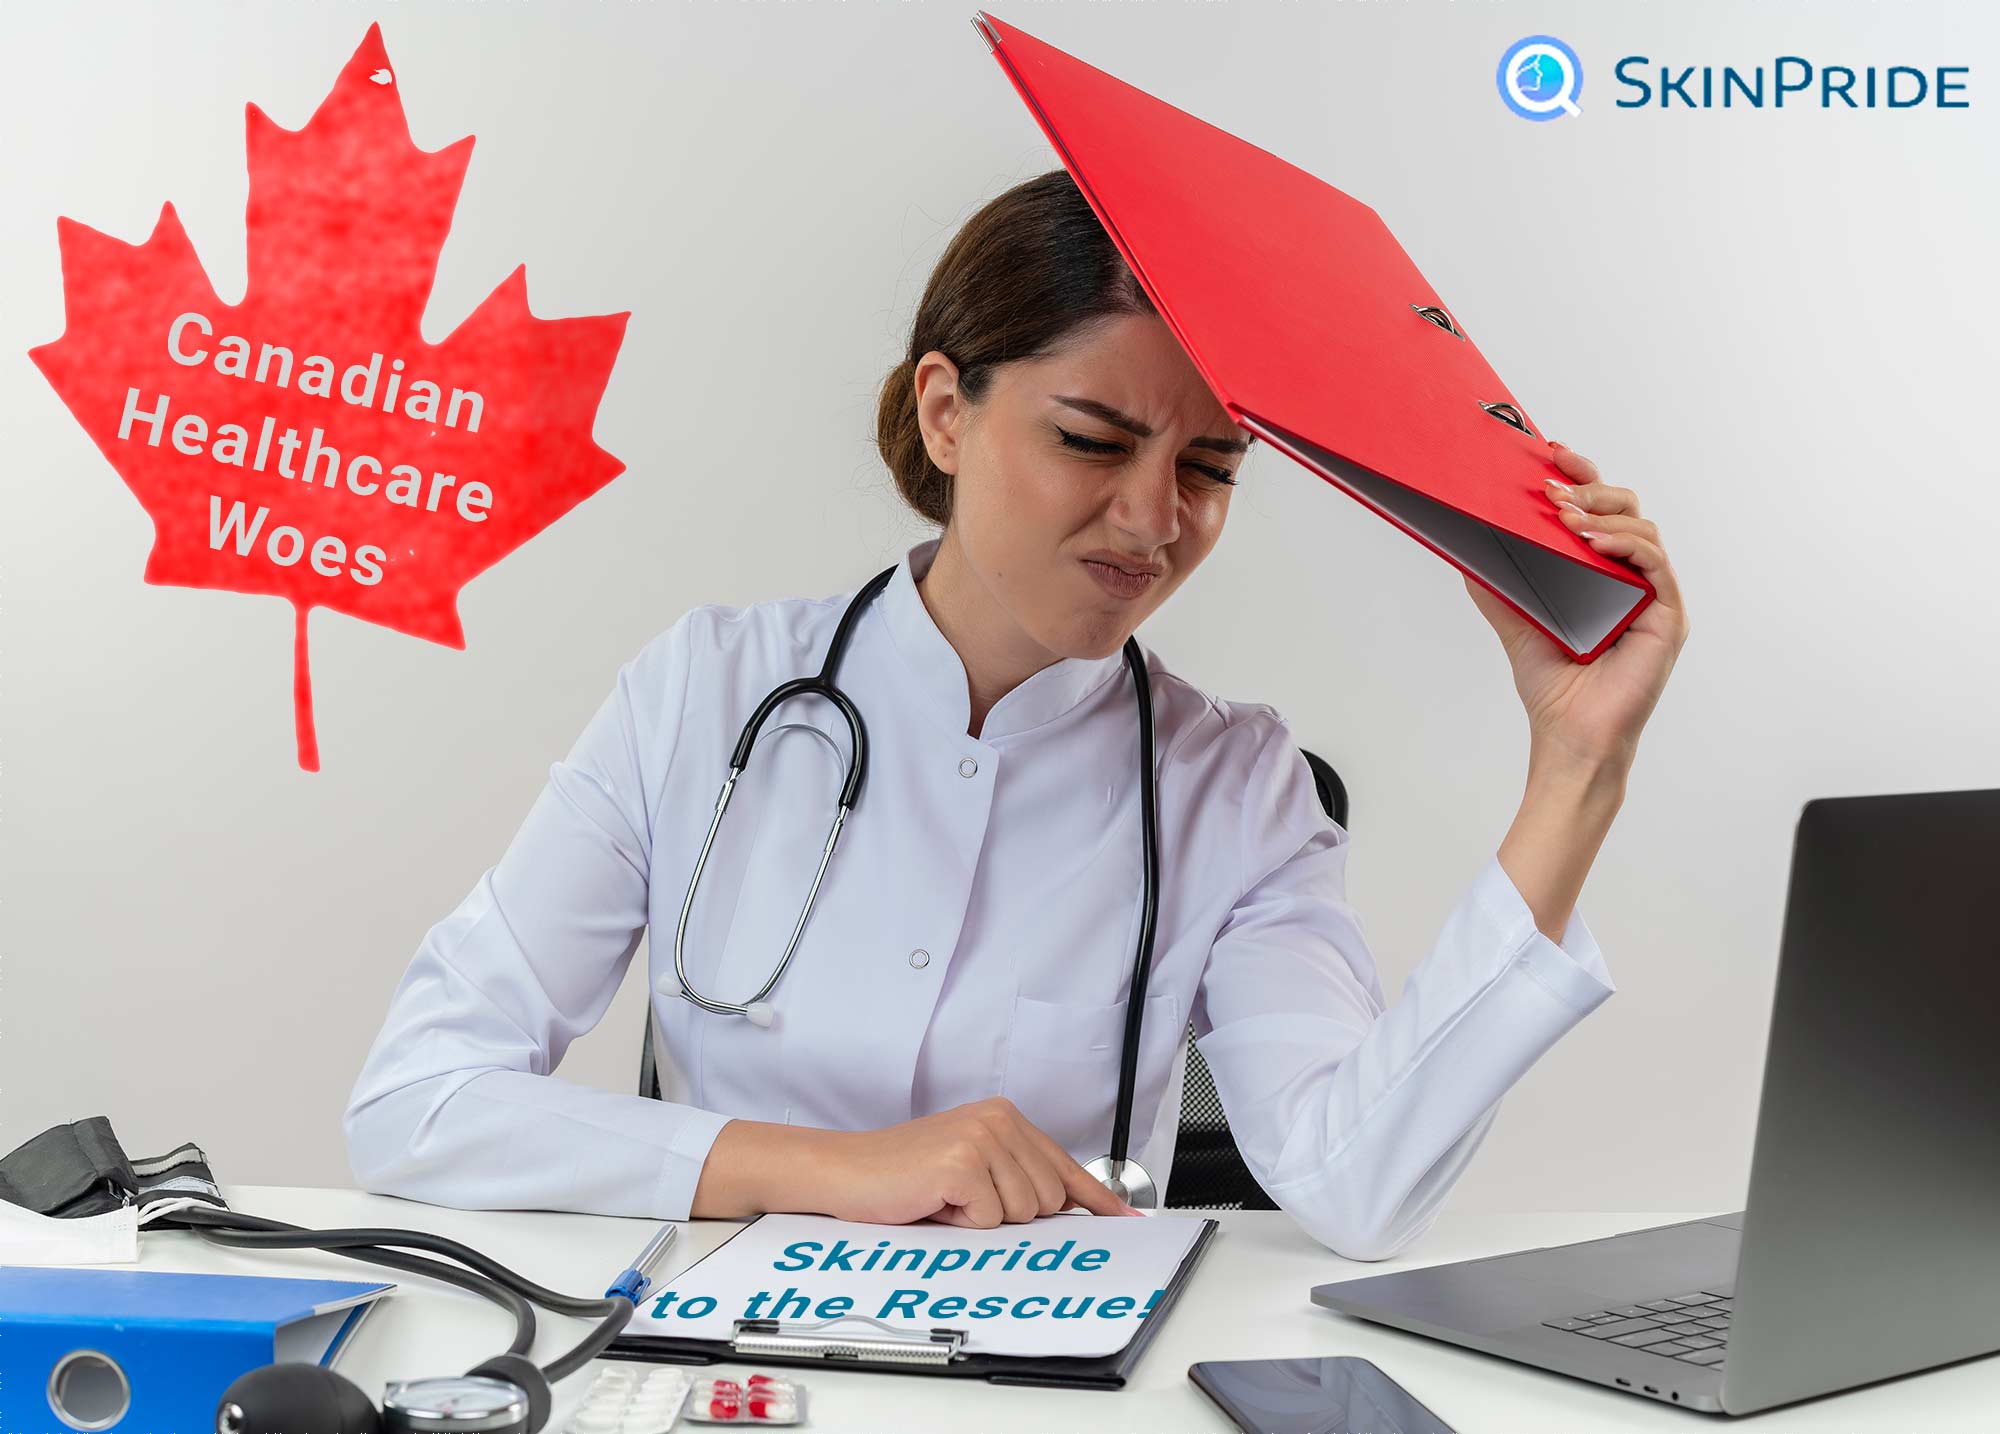 Skinpride: Transforming Canadian Healthcare with Innovative Skincare Solutions!